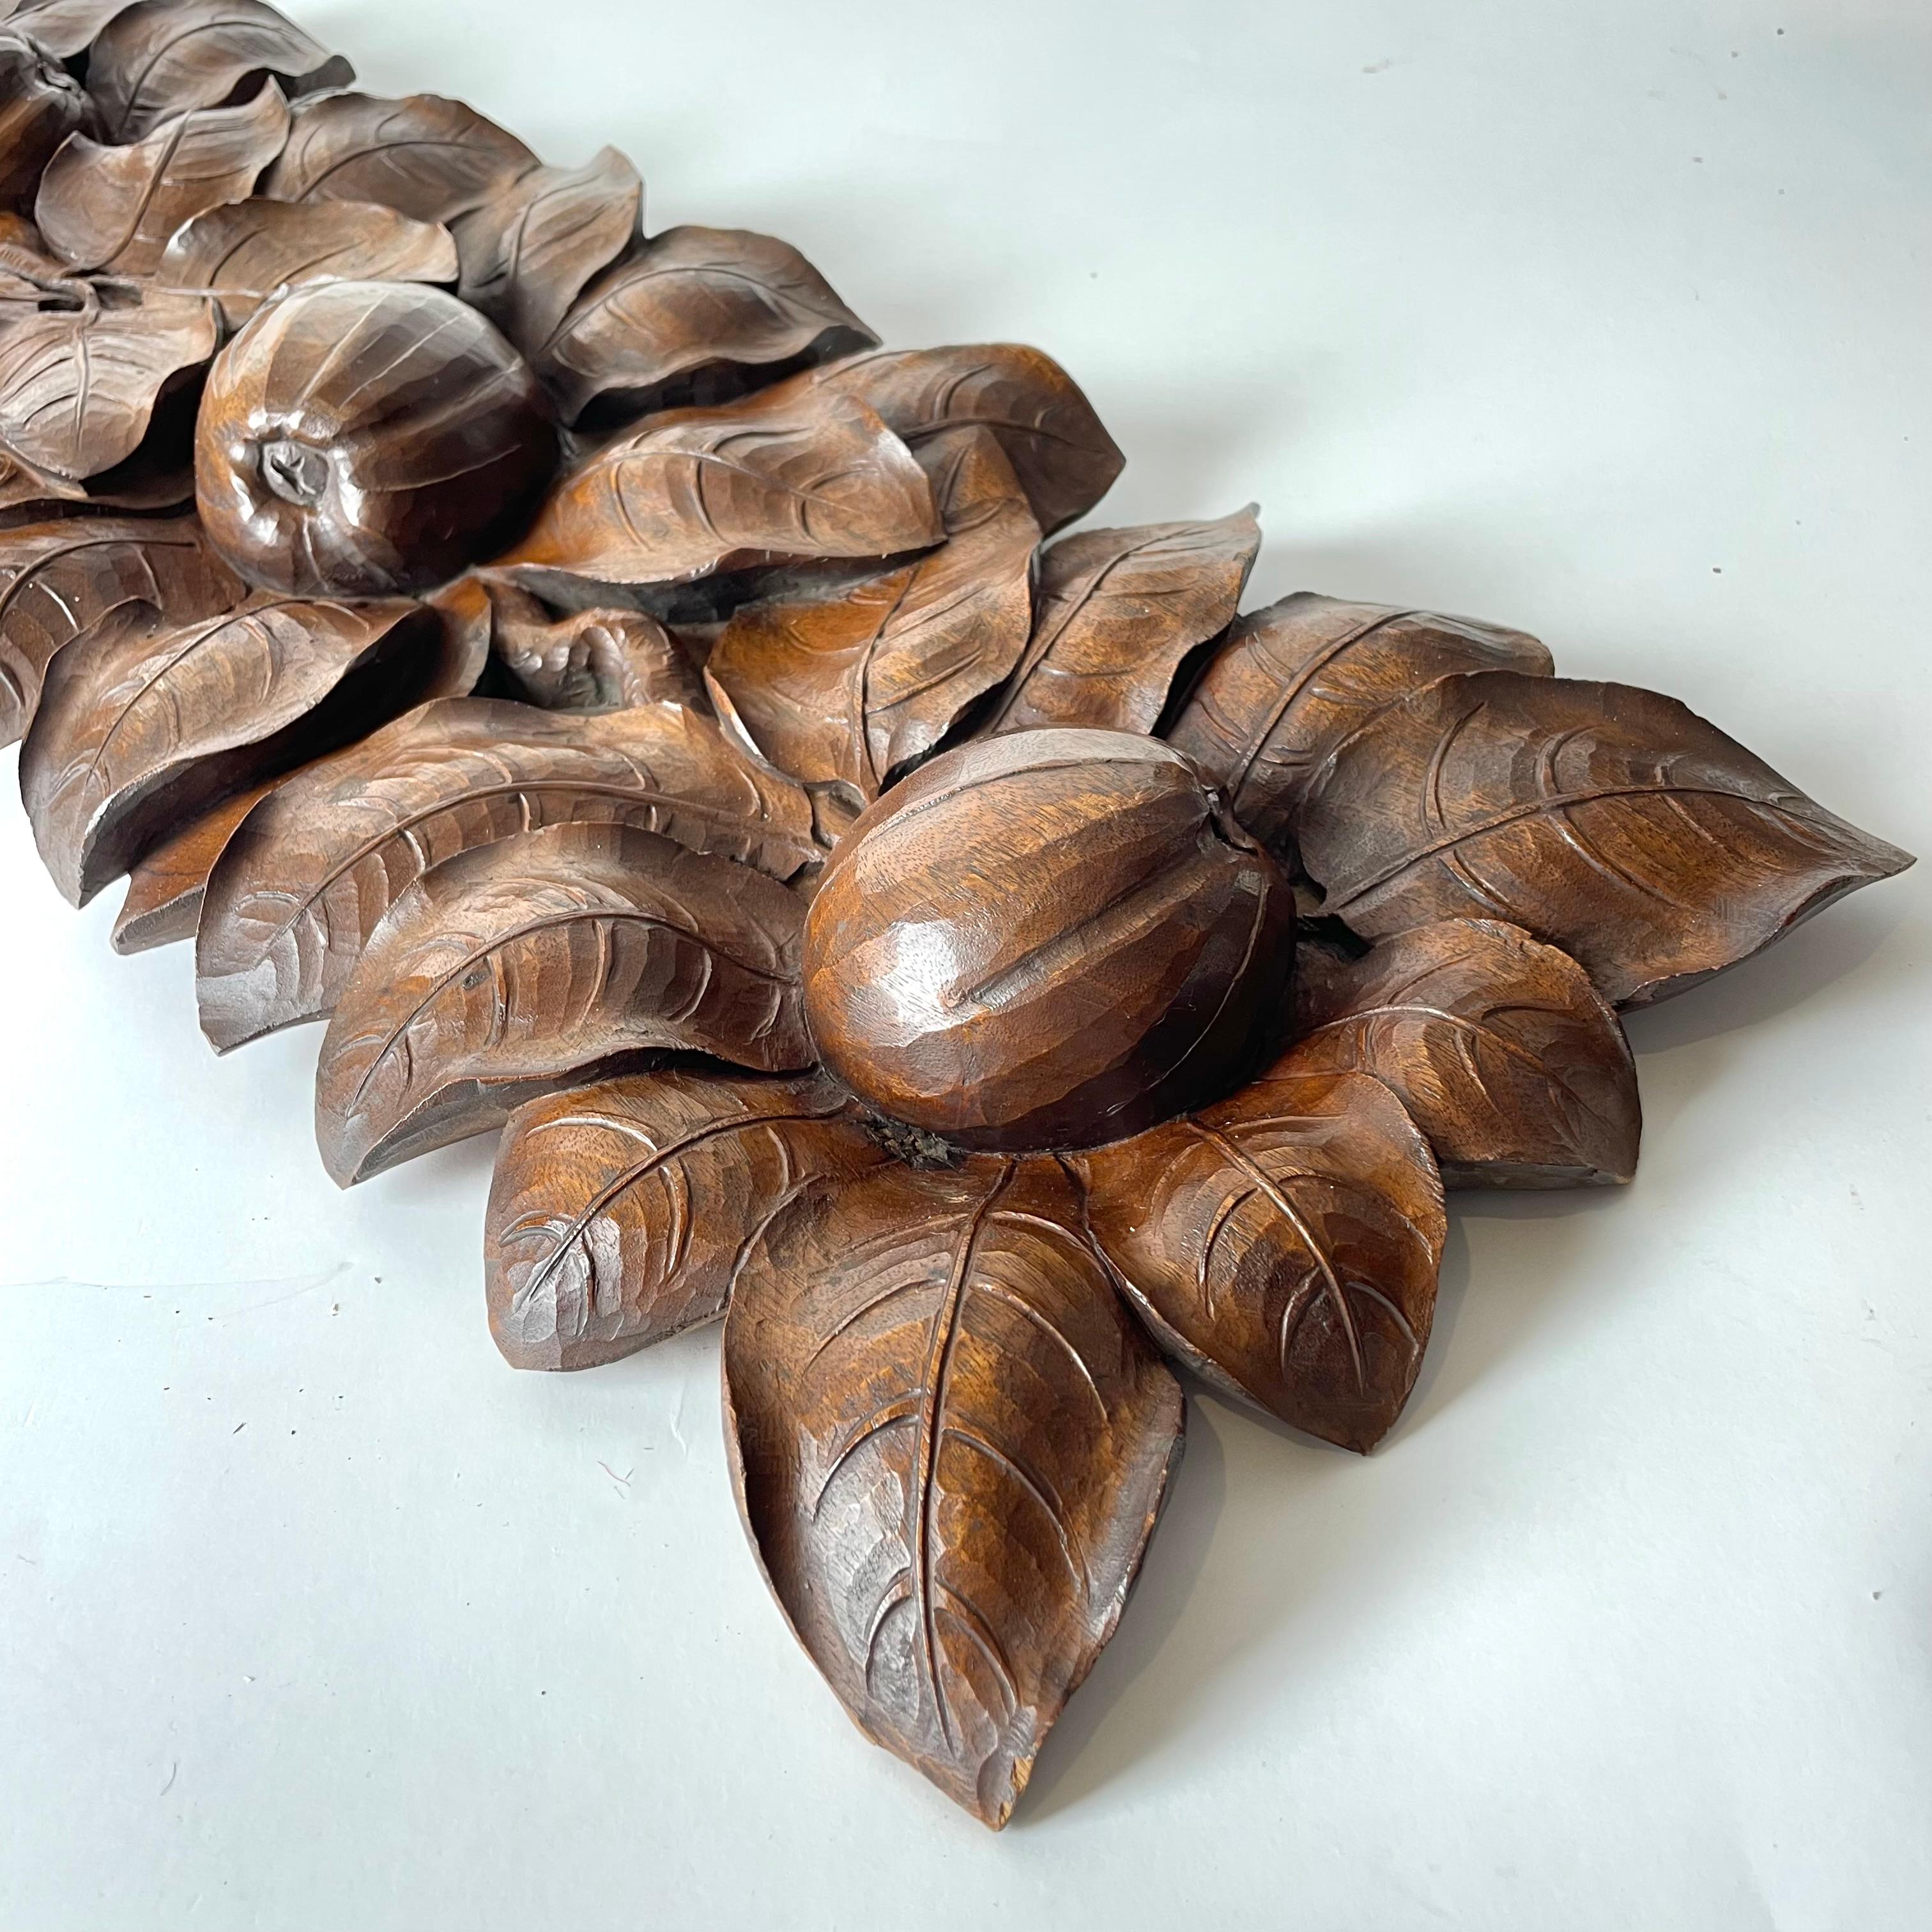 European Walnut Woodcarved Decorative Element Depicting Apples Foliage Early 20th Century For Sale